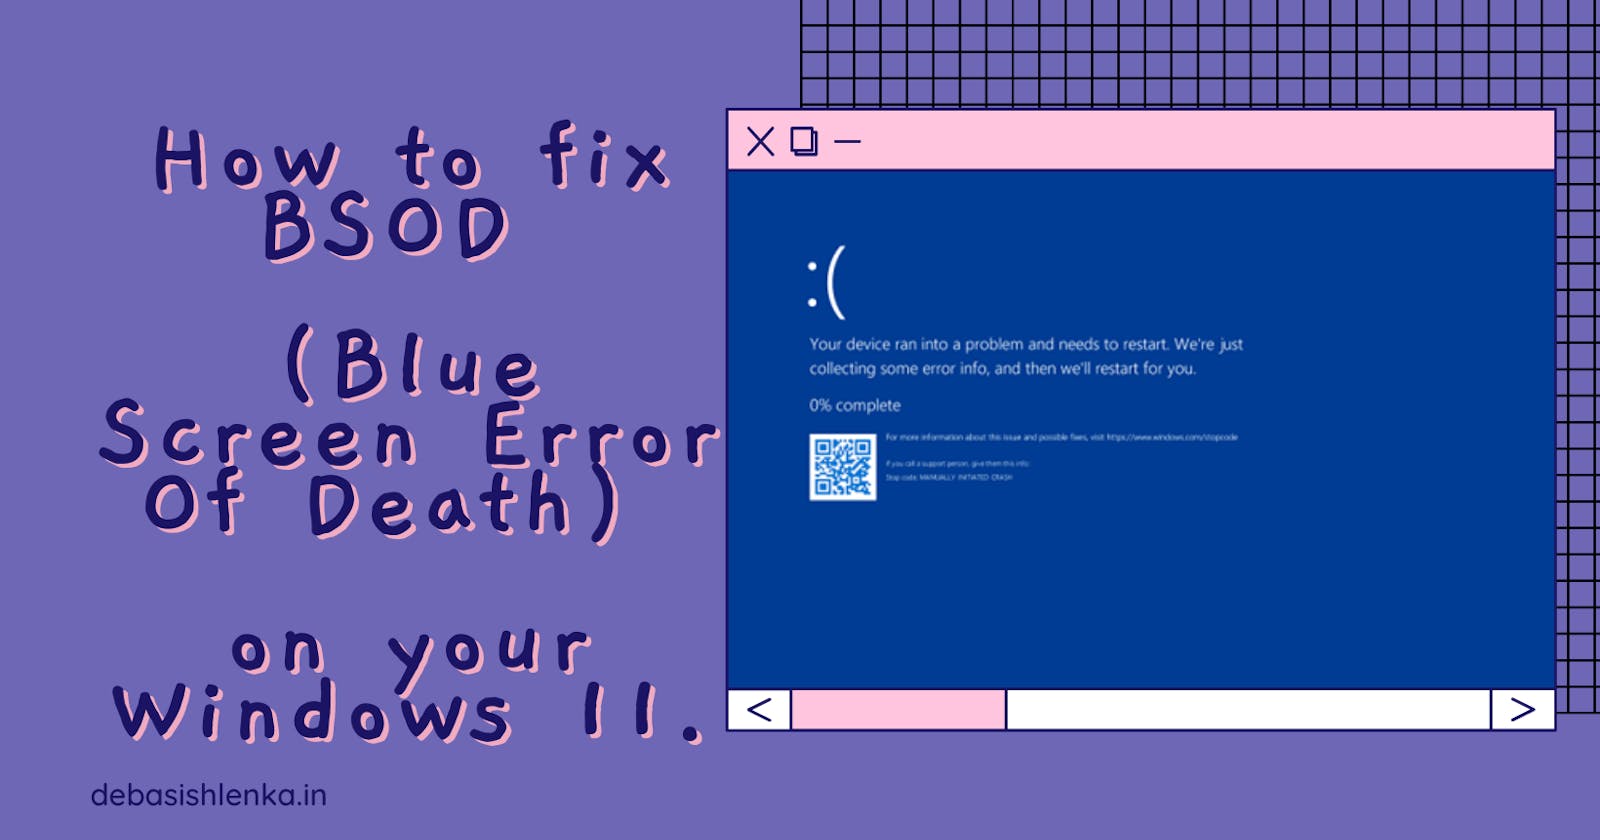 How to fix BSOD (Blue Screen Error Of Death) on your Windows 11.